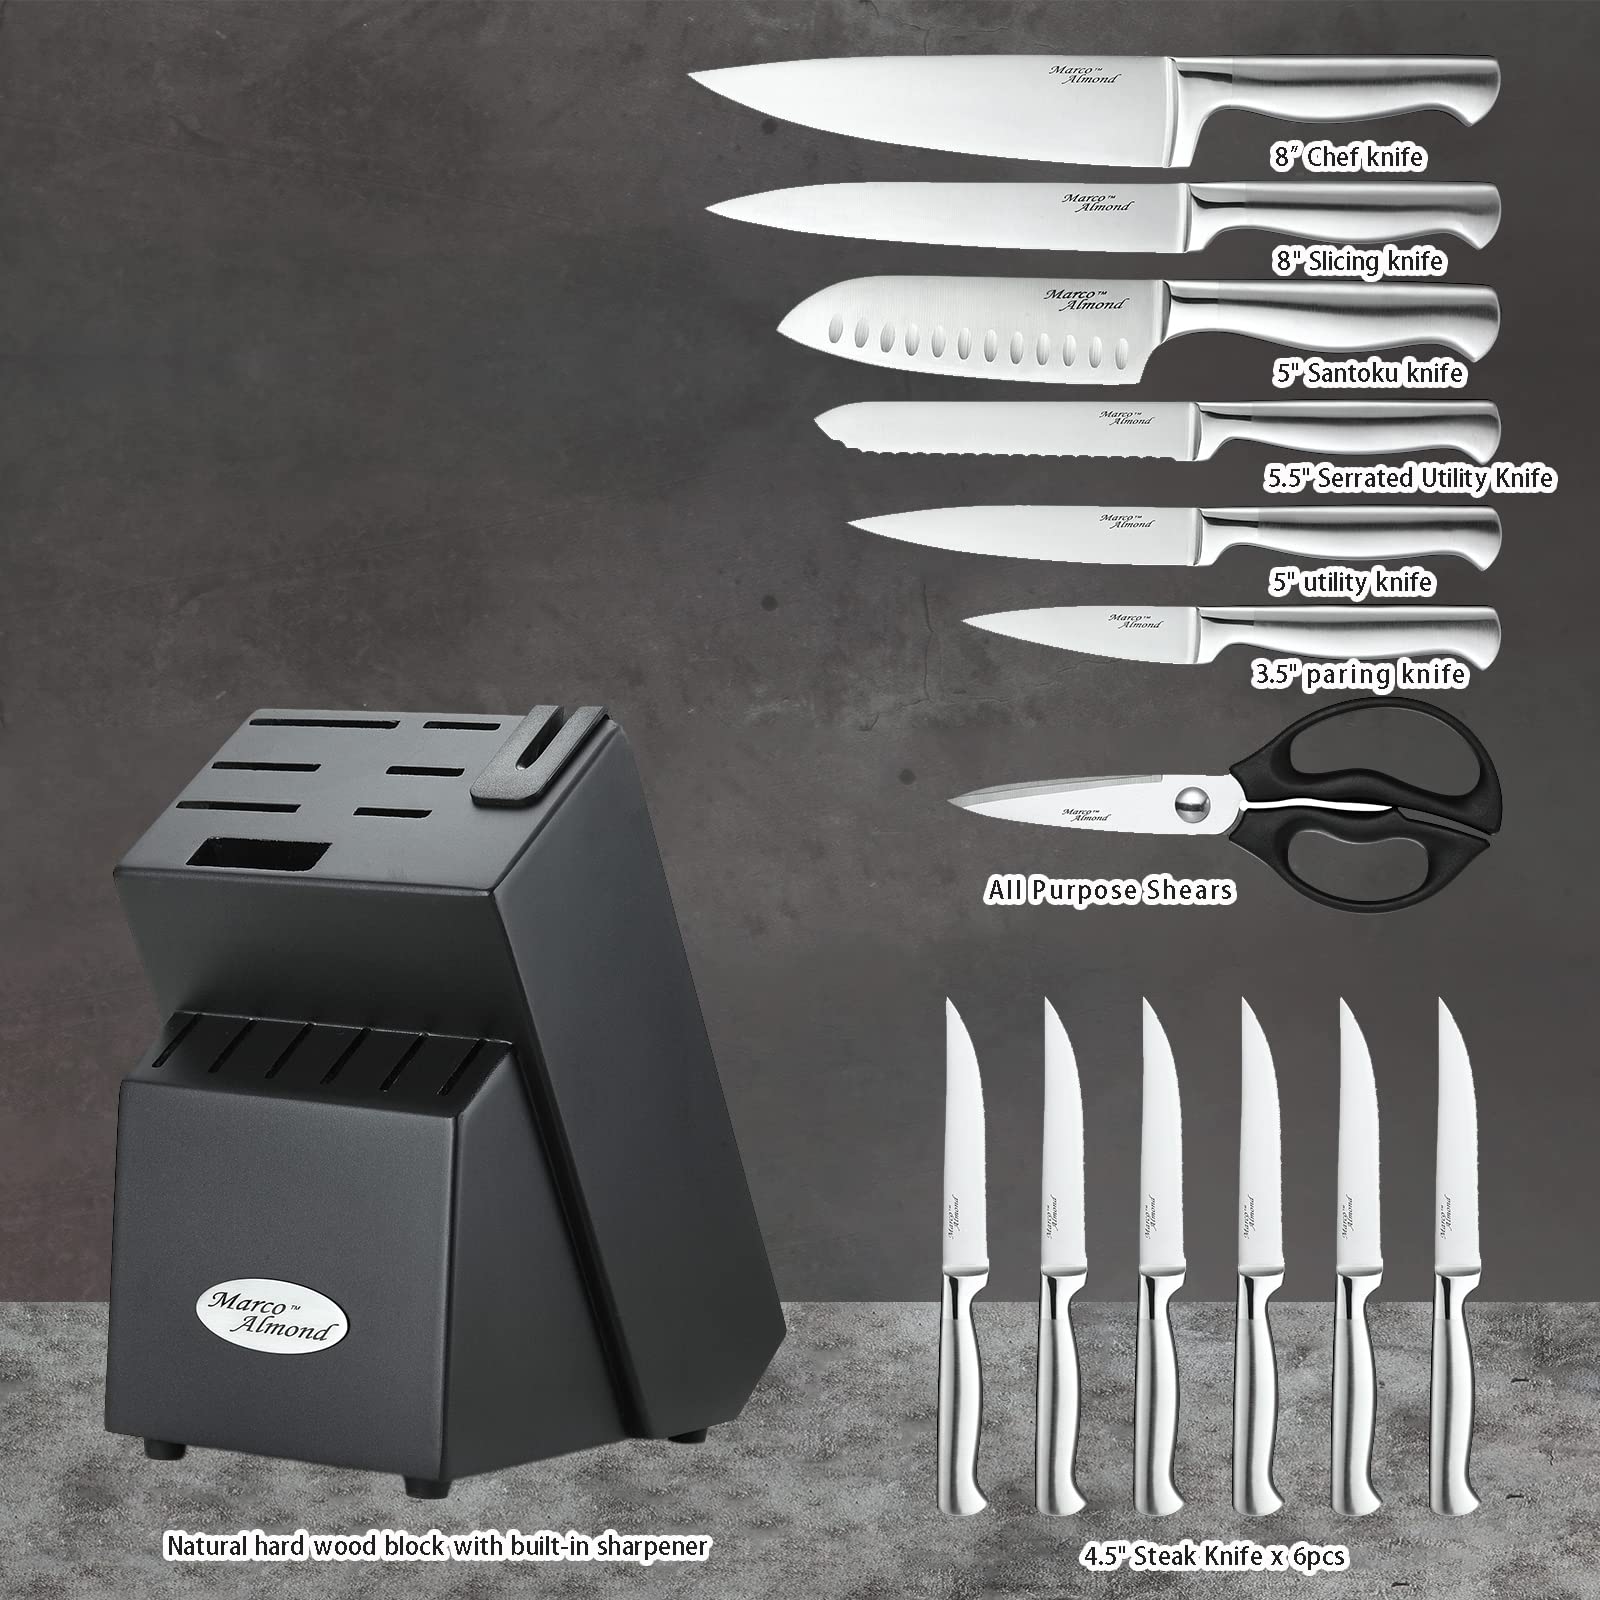 Marco Almond® Knife Set with Block KYA28, 14 Pieces Stainless Steel Chef Cutlery Kitchen Knives Block Set with Built-in Sharpener